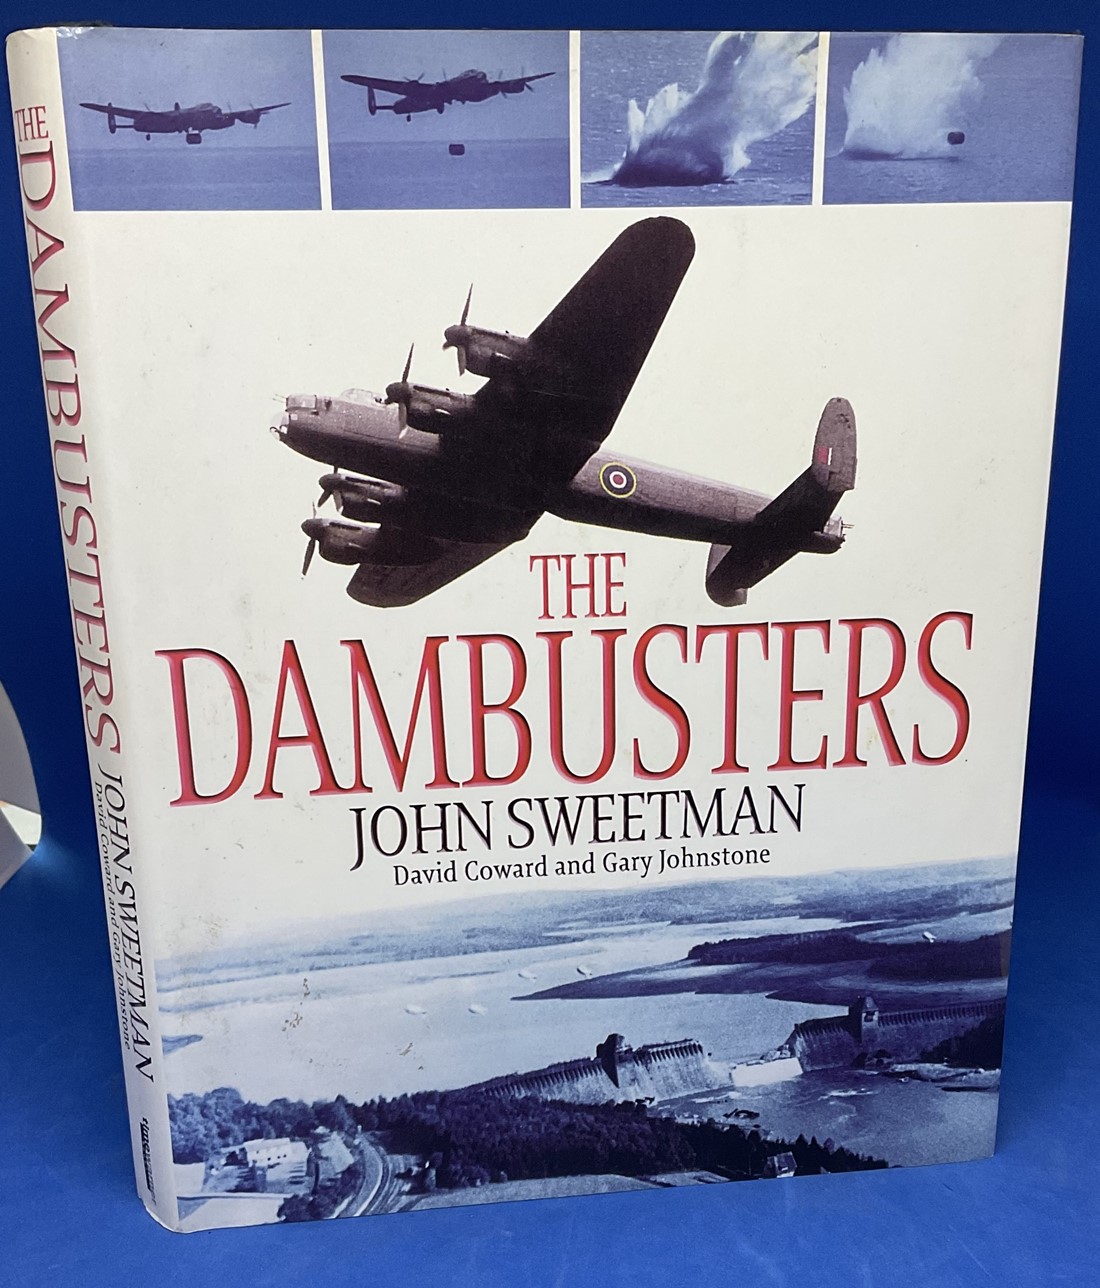 WW2 2 Signed The Dambusters 1st Ed Hardback Book by John Sweetman. Signed by Mary Stopes-Roe and Geo